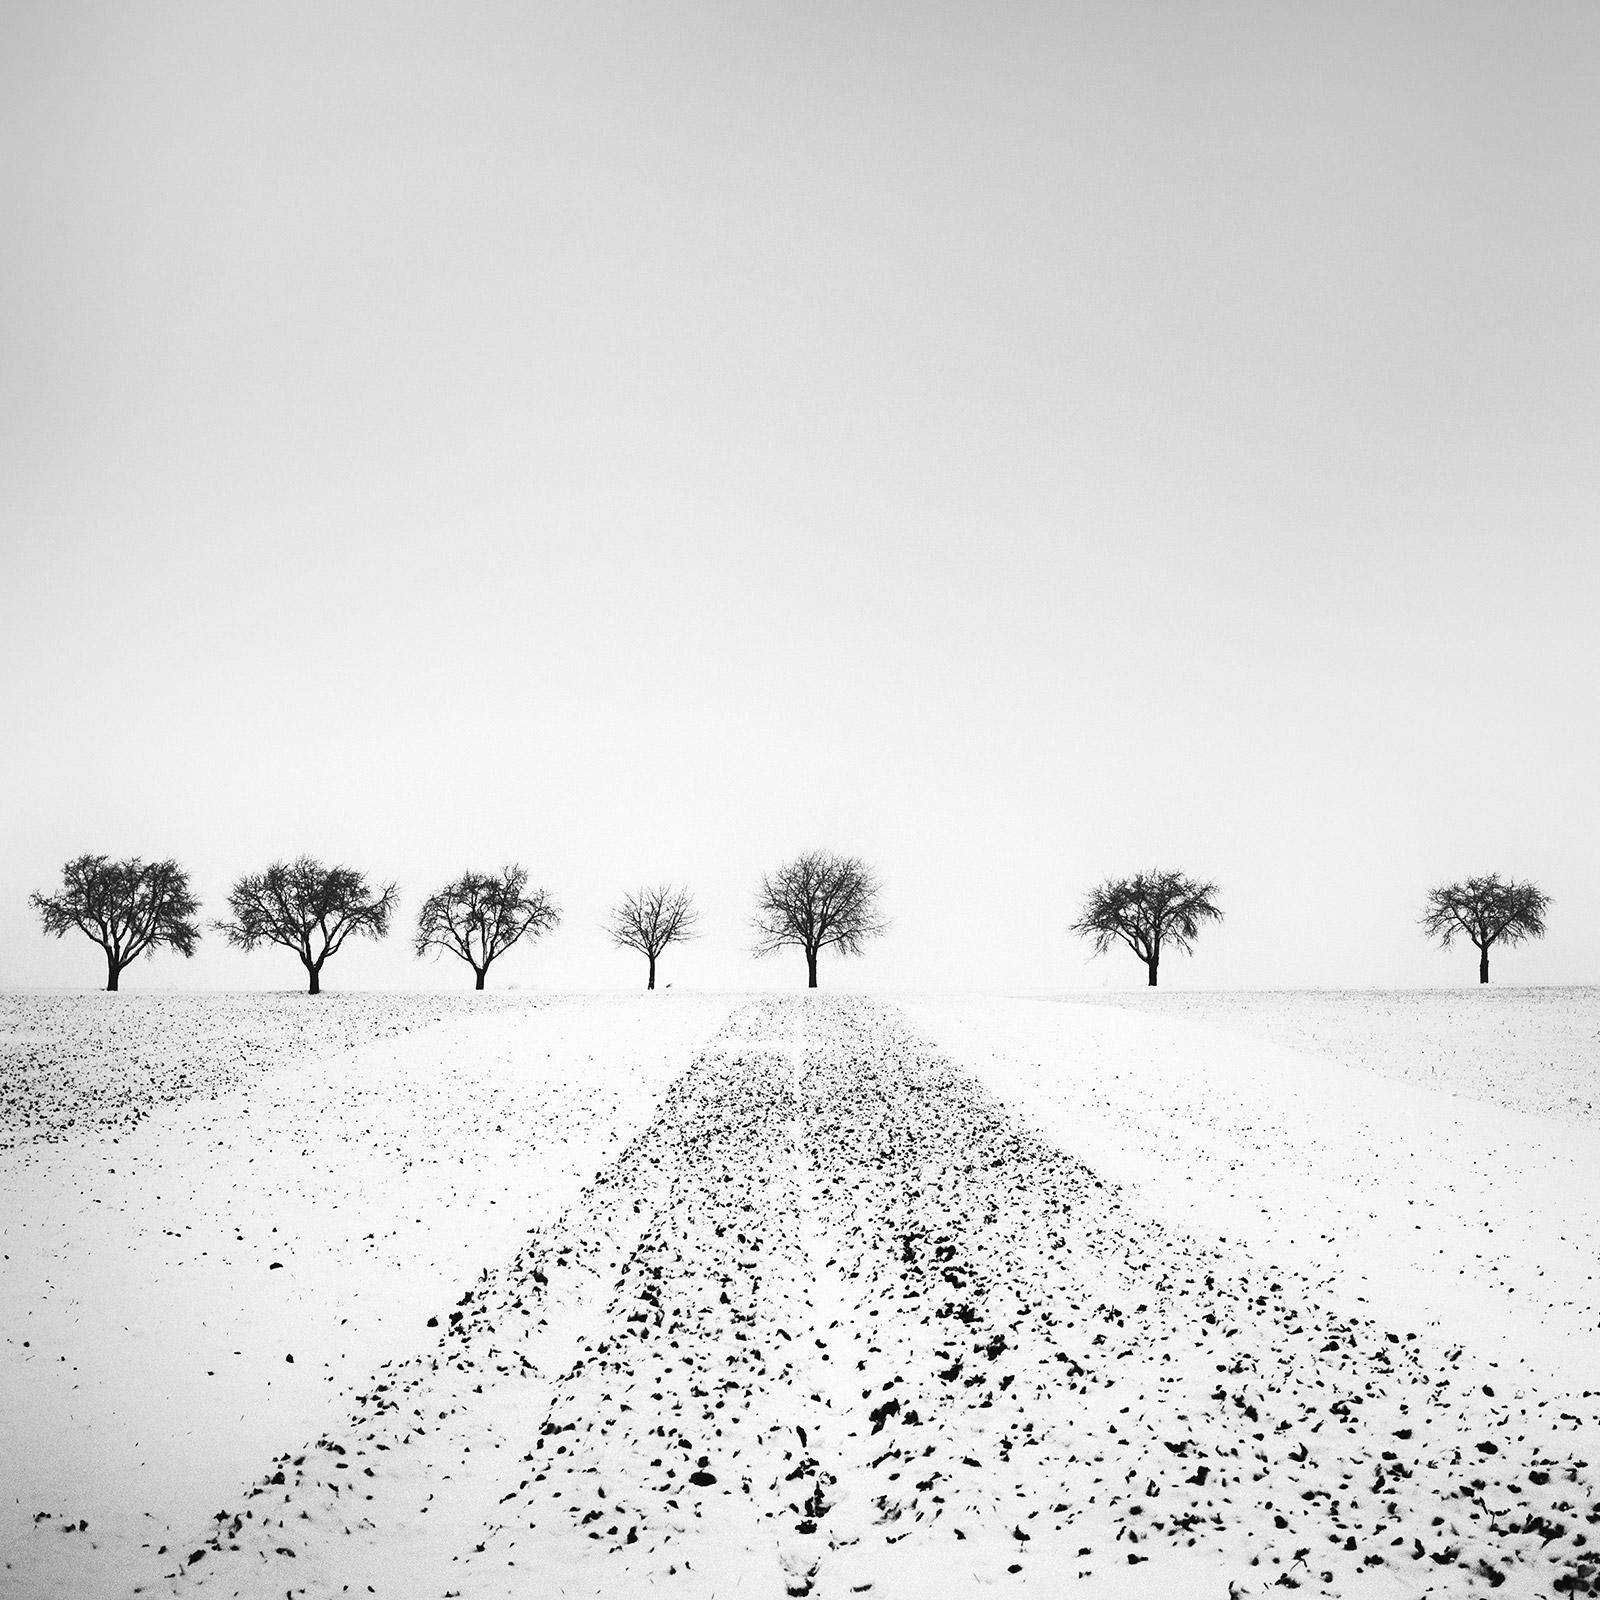 Trees in snowy Field, Winterland, black and white, landscape photography, print